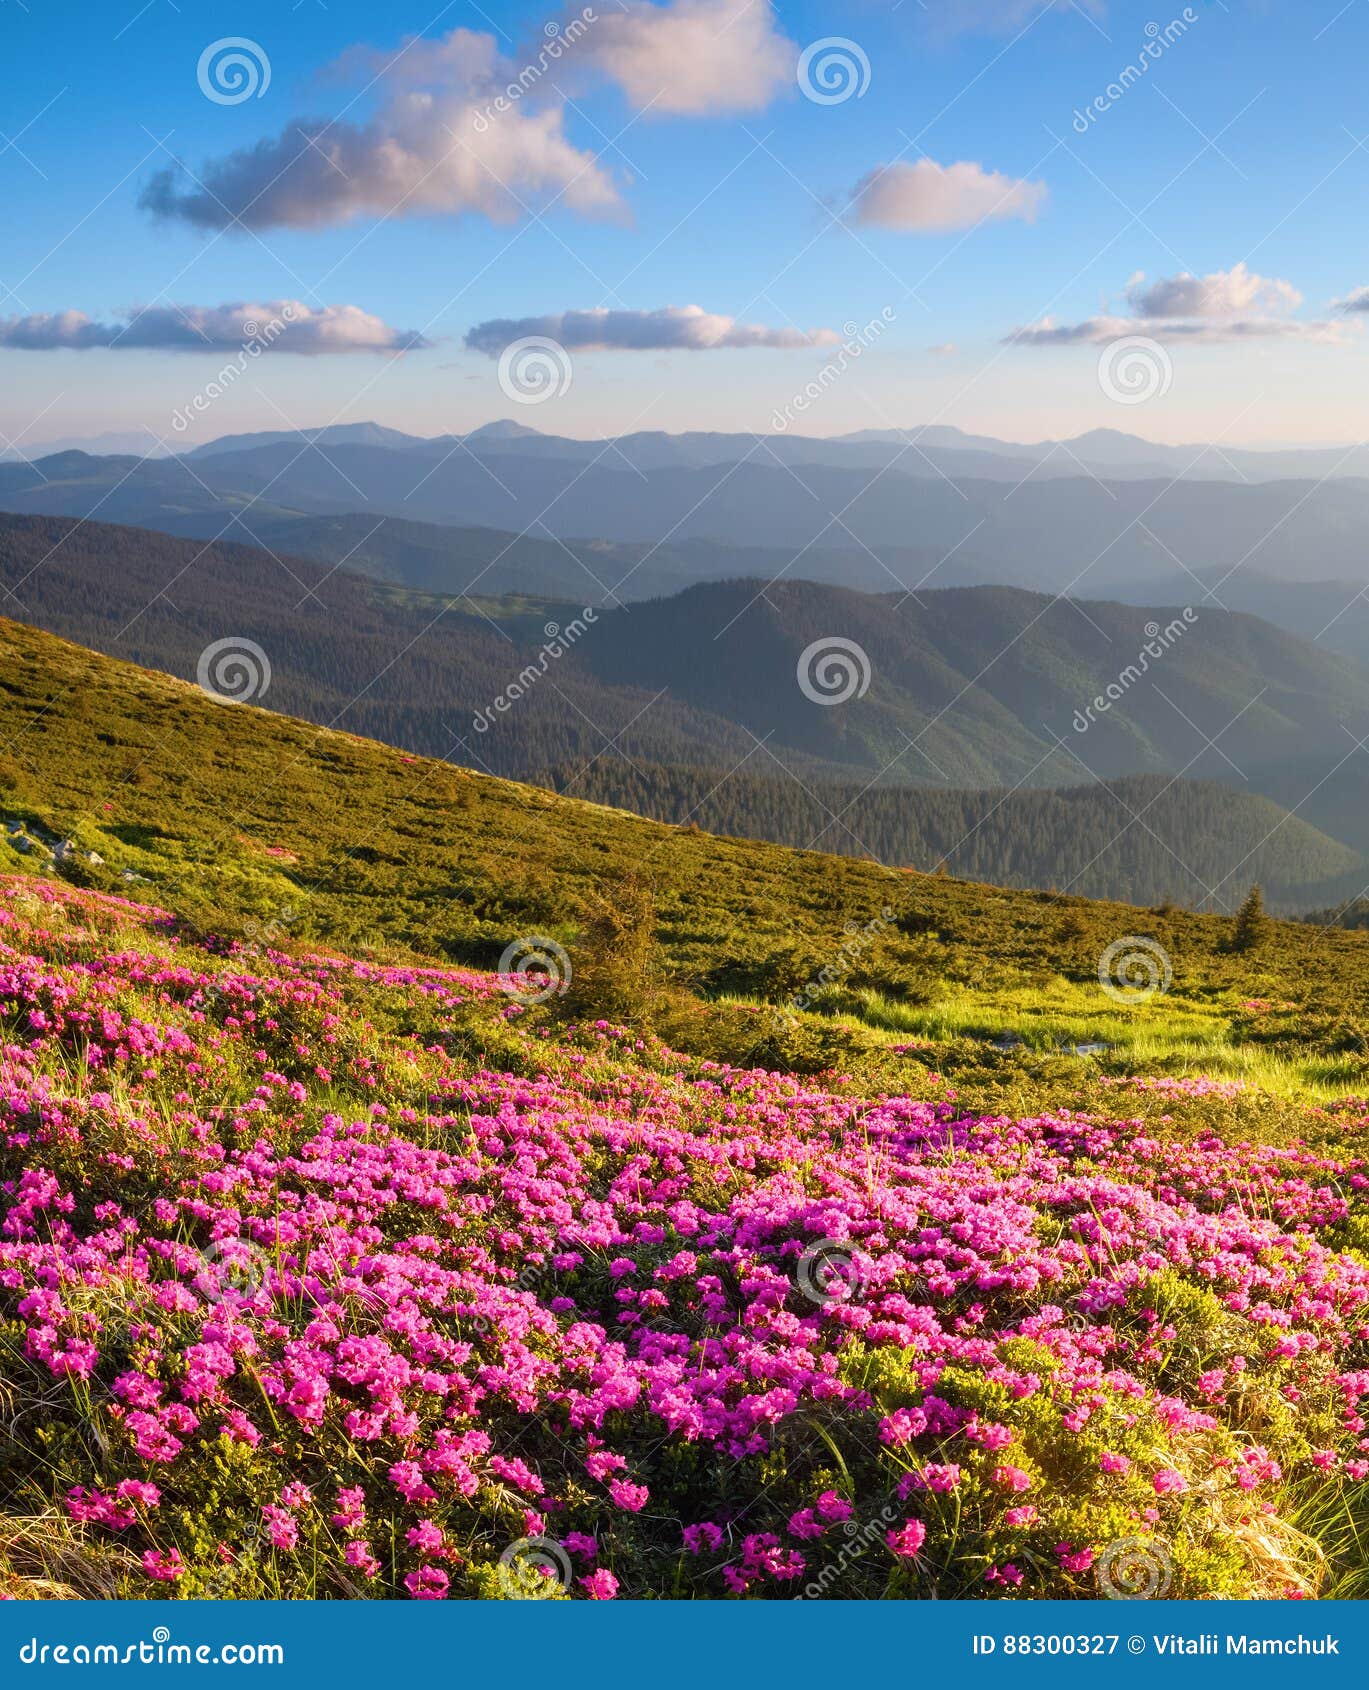 marvelous pink rhododendrons on the mountains.